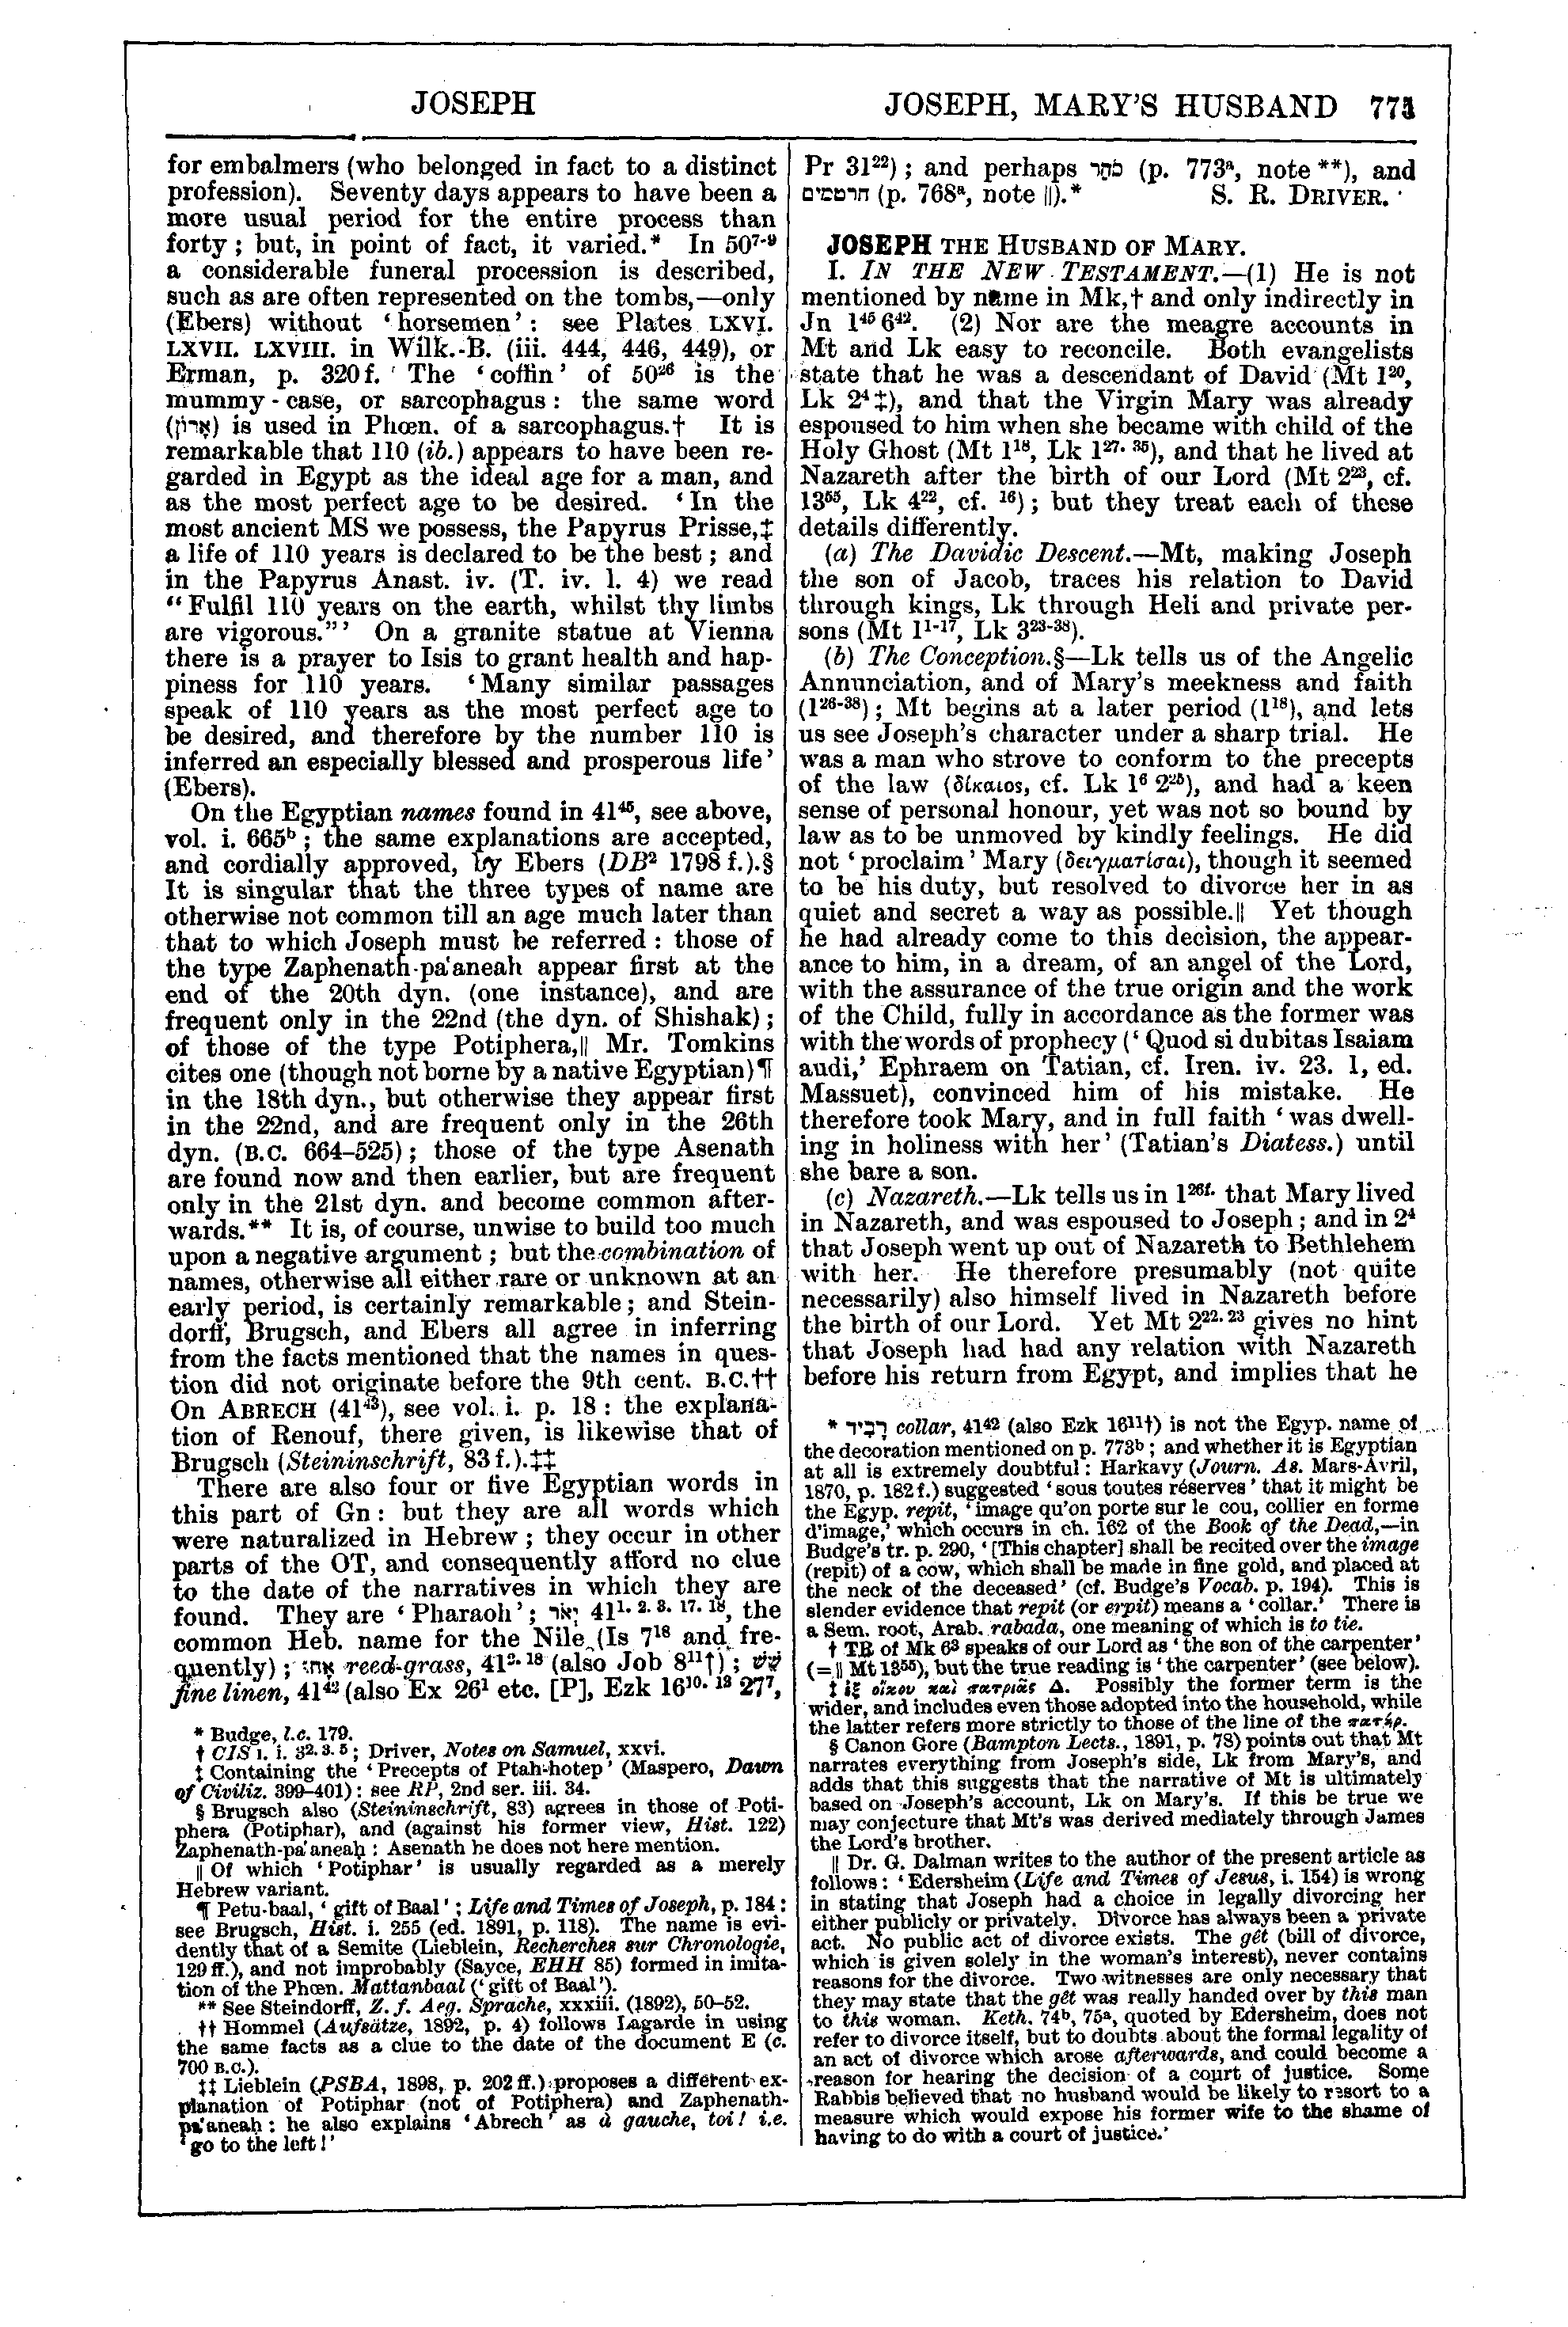 Image of page 775